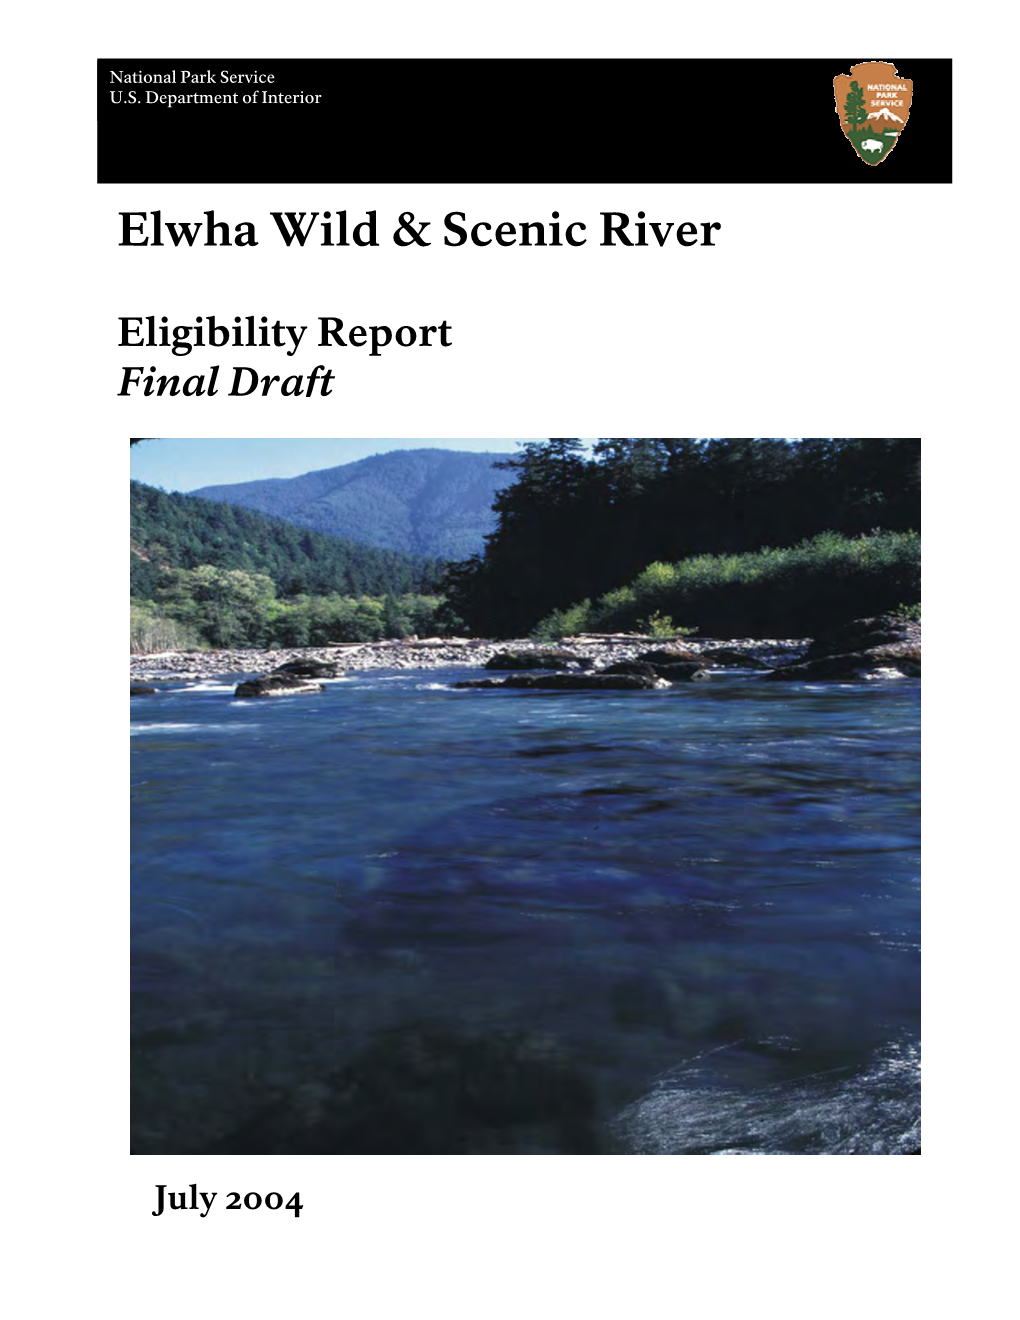 Elwha River Watershed, Located on the Olympic Peninsula of Washington State, As a Component of the National Wild and Scenic Rivers System (National System)